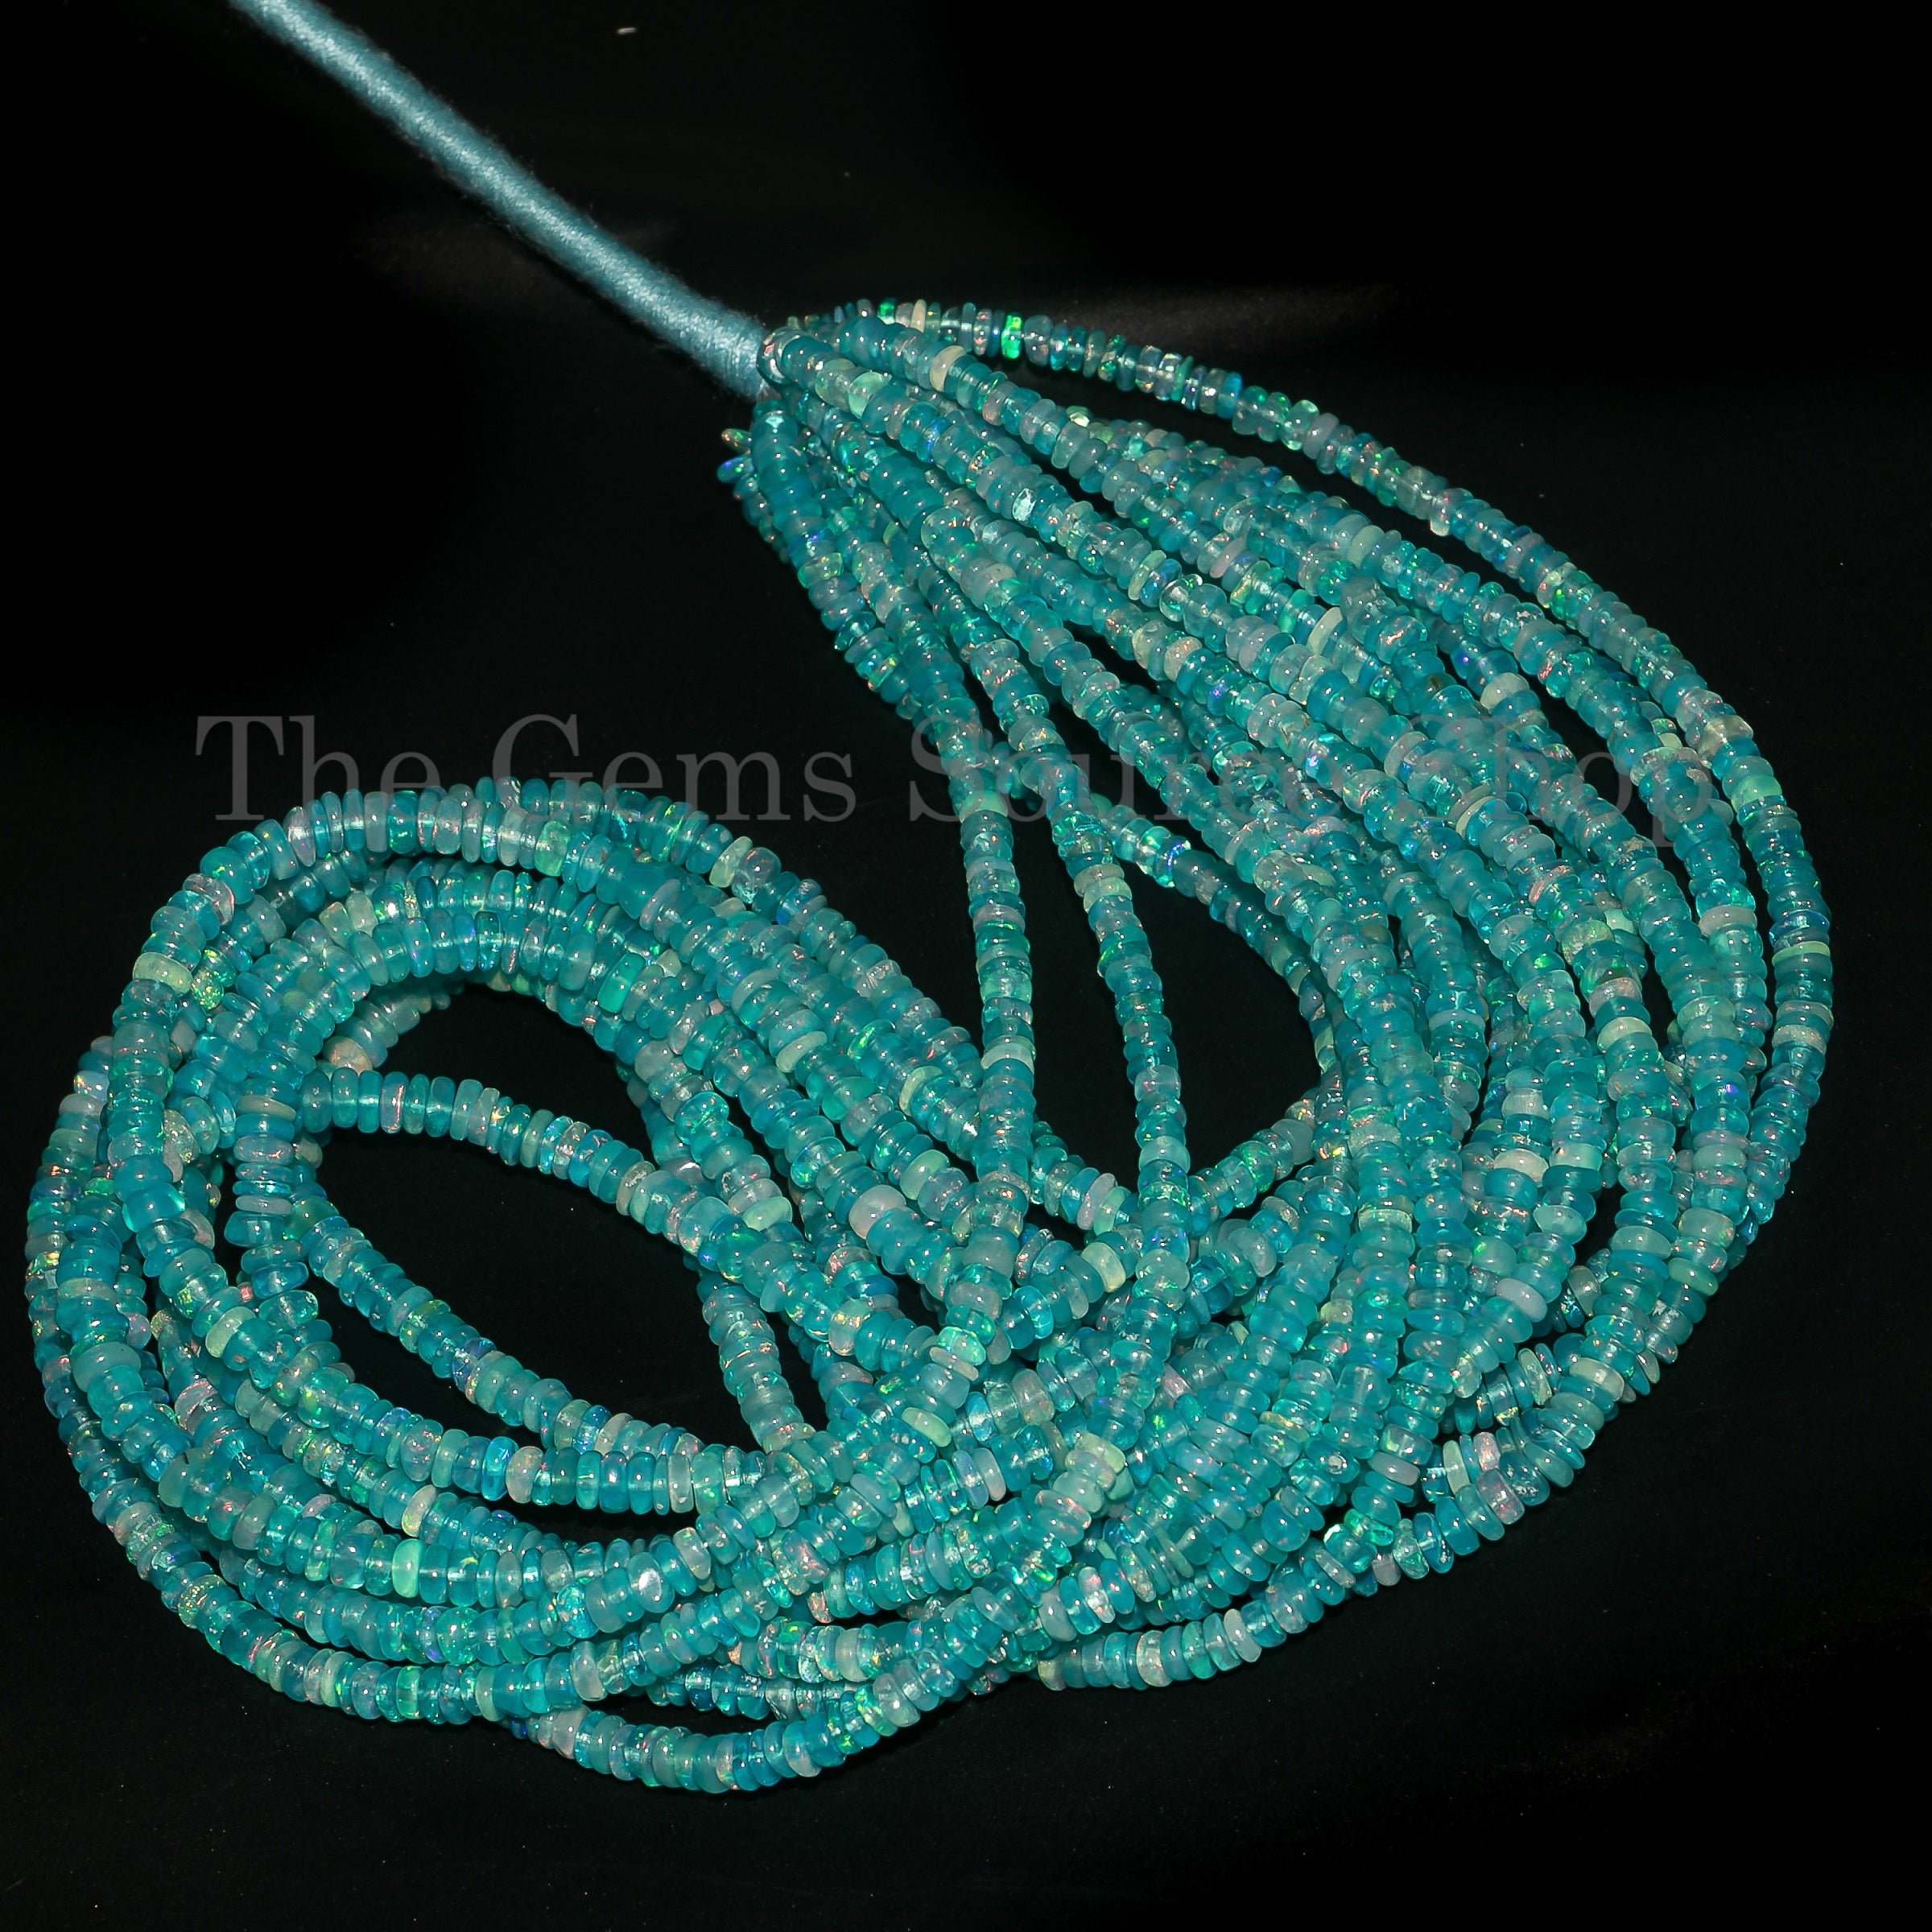 3-5 mm Paraiba Opal Smooth Rondelle Beads, Loose Opal Beads TGS-4541